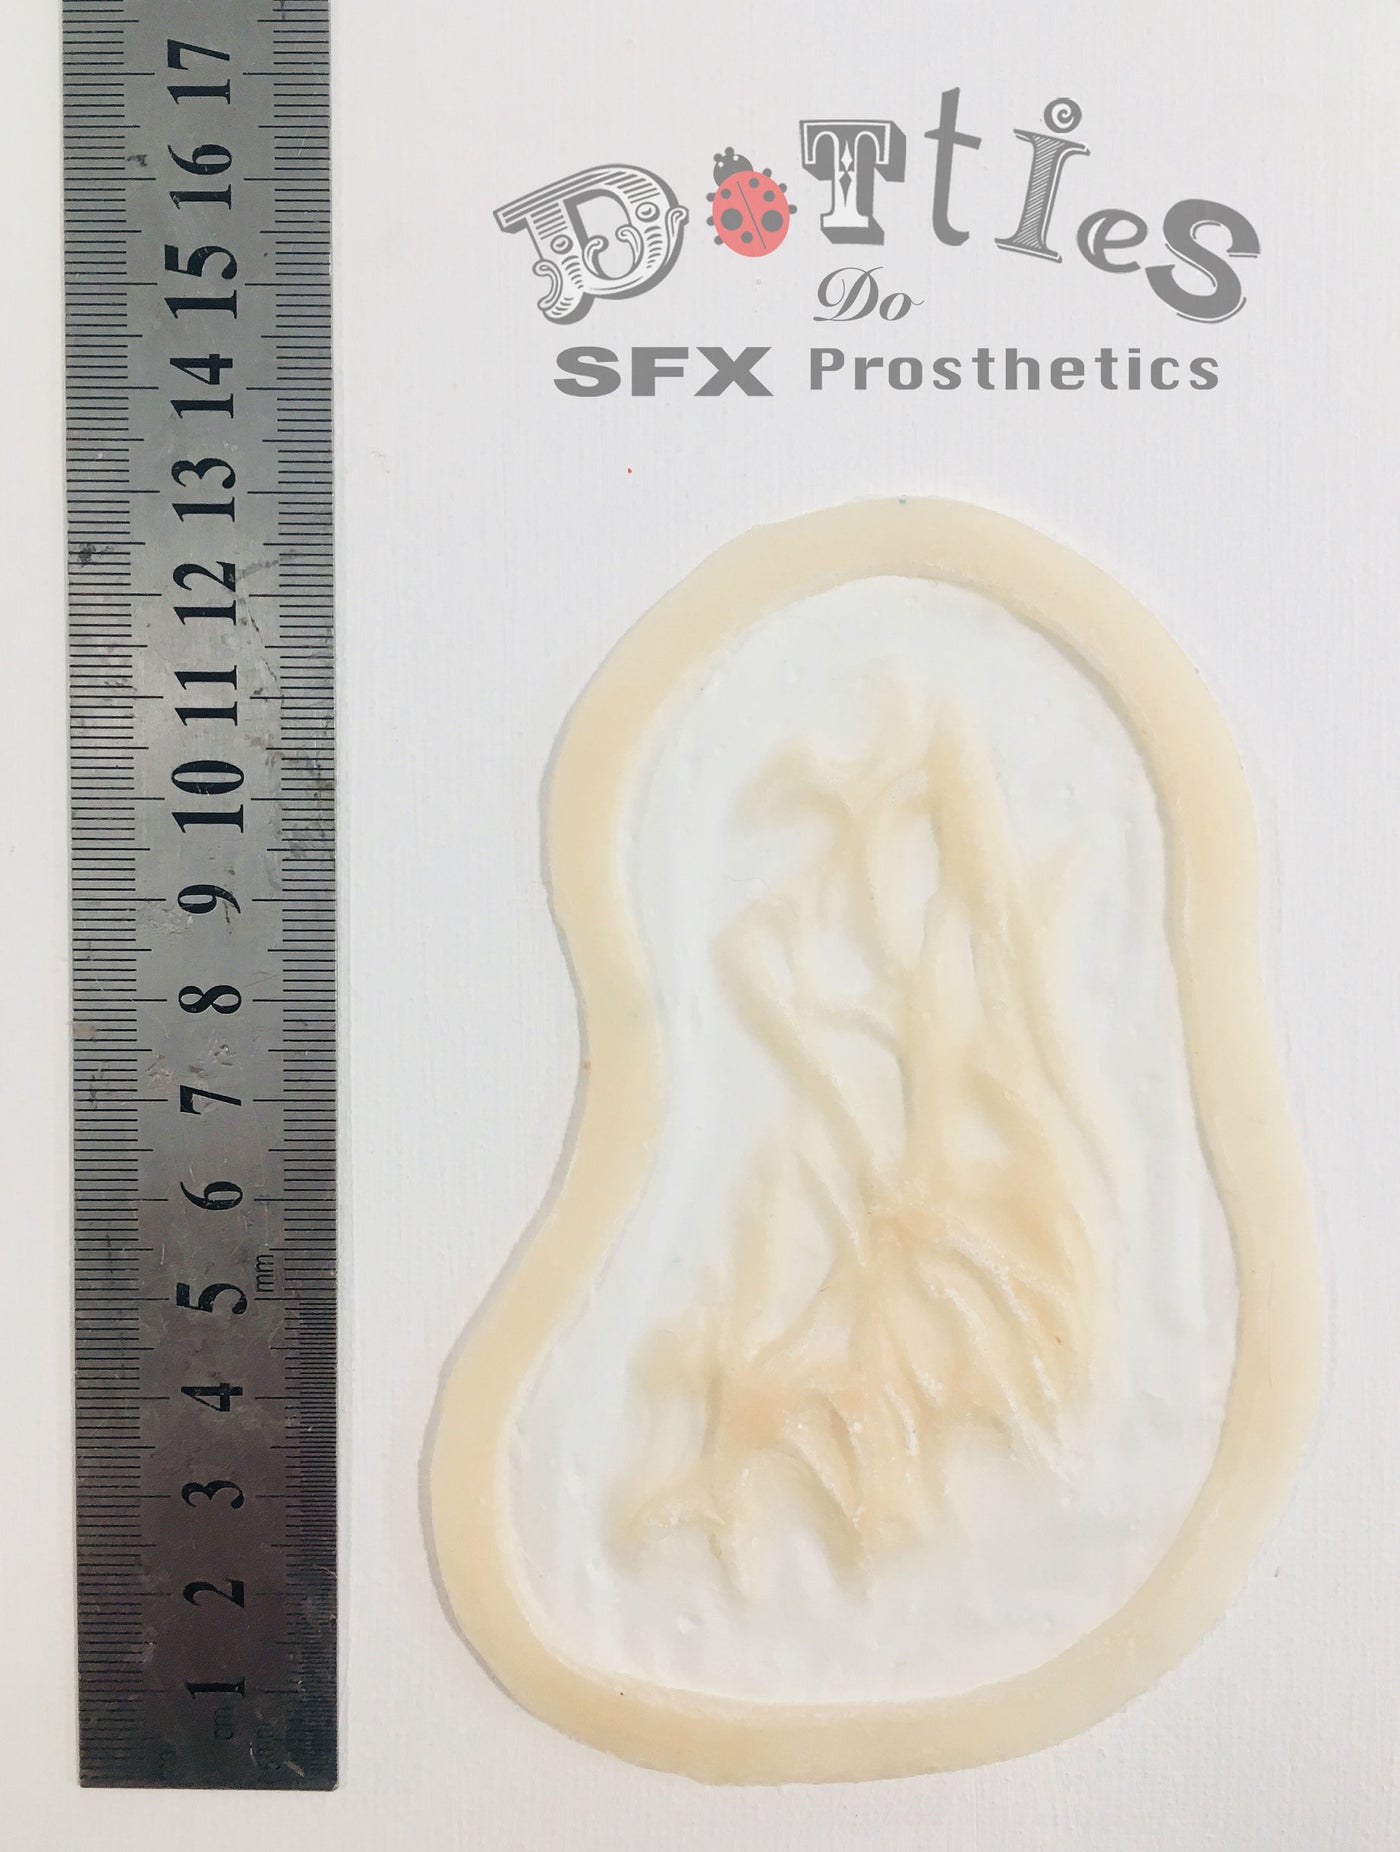 Pack of 2 Unpainted Silicone Prosthetic, Large Burnt Skin  / large wound / freddy